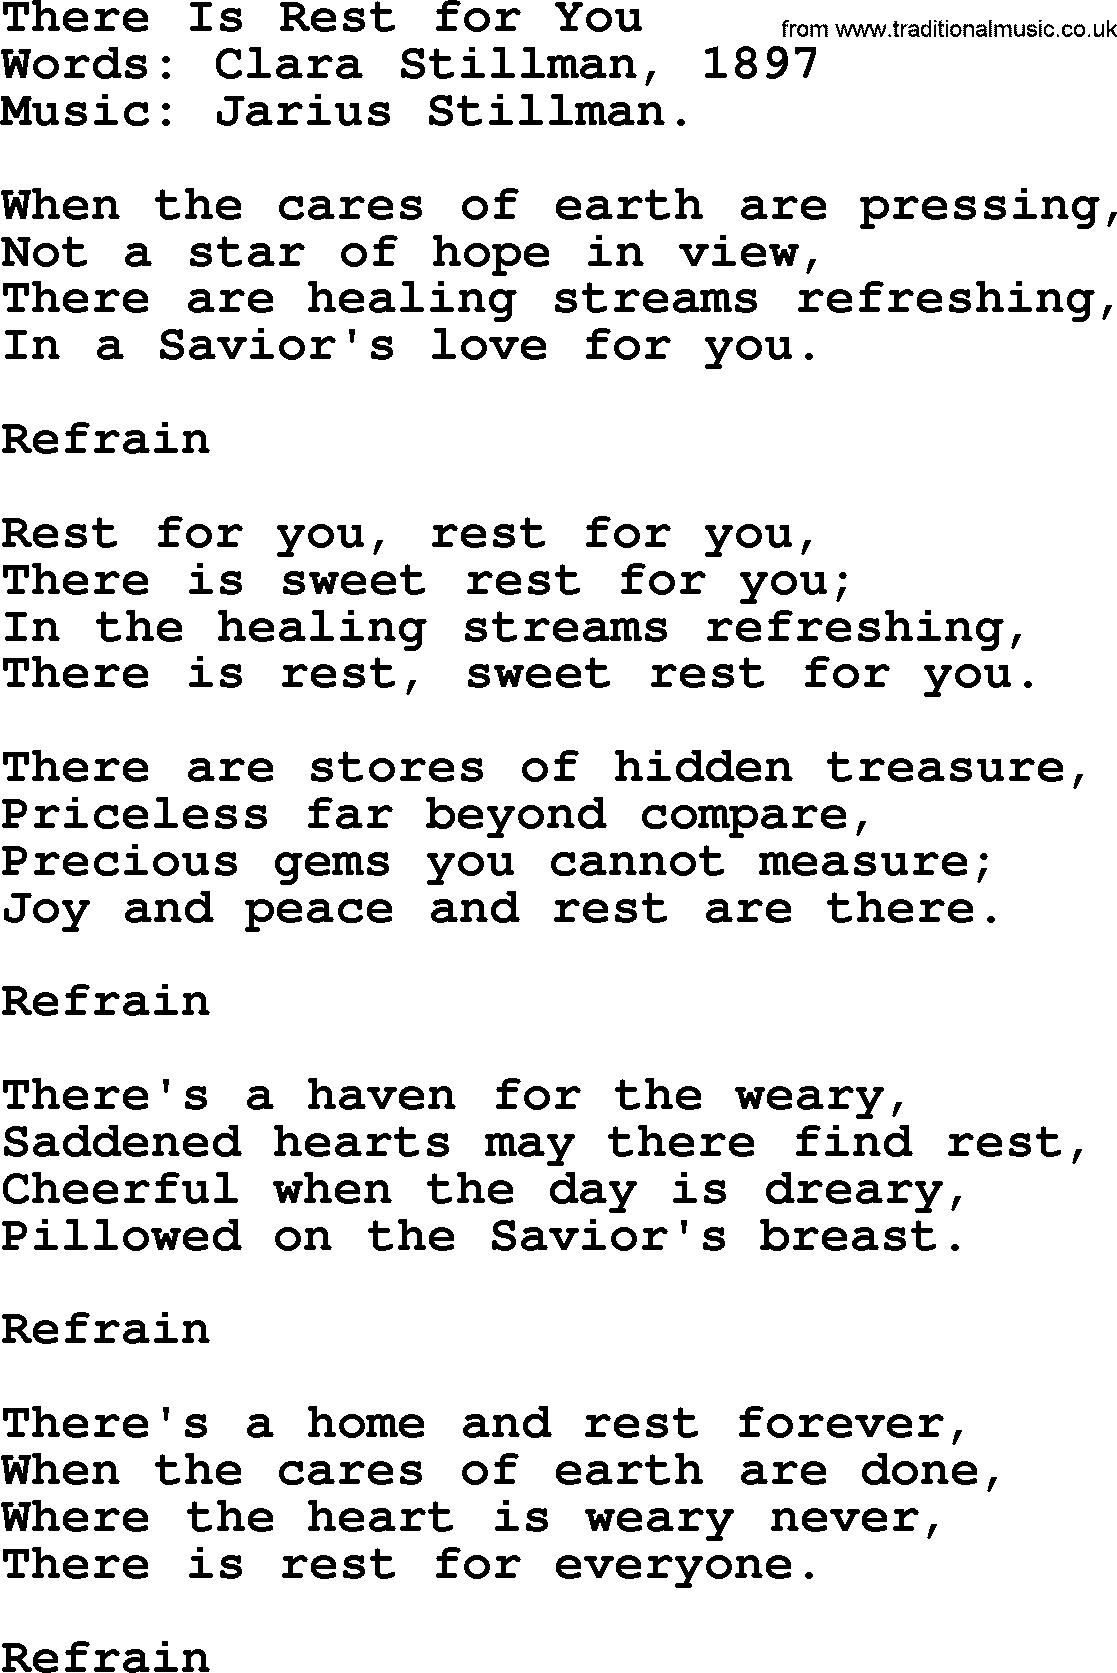 Songs and Hymns about Heaven: There Is Rest For You lyrics with PDF